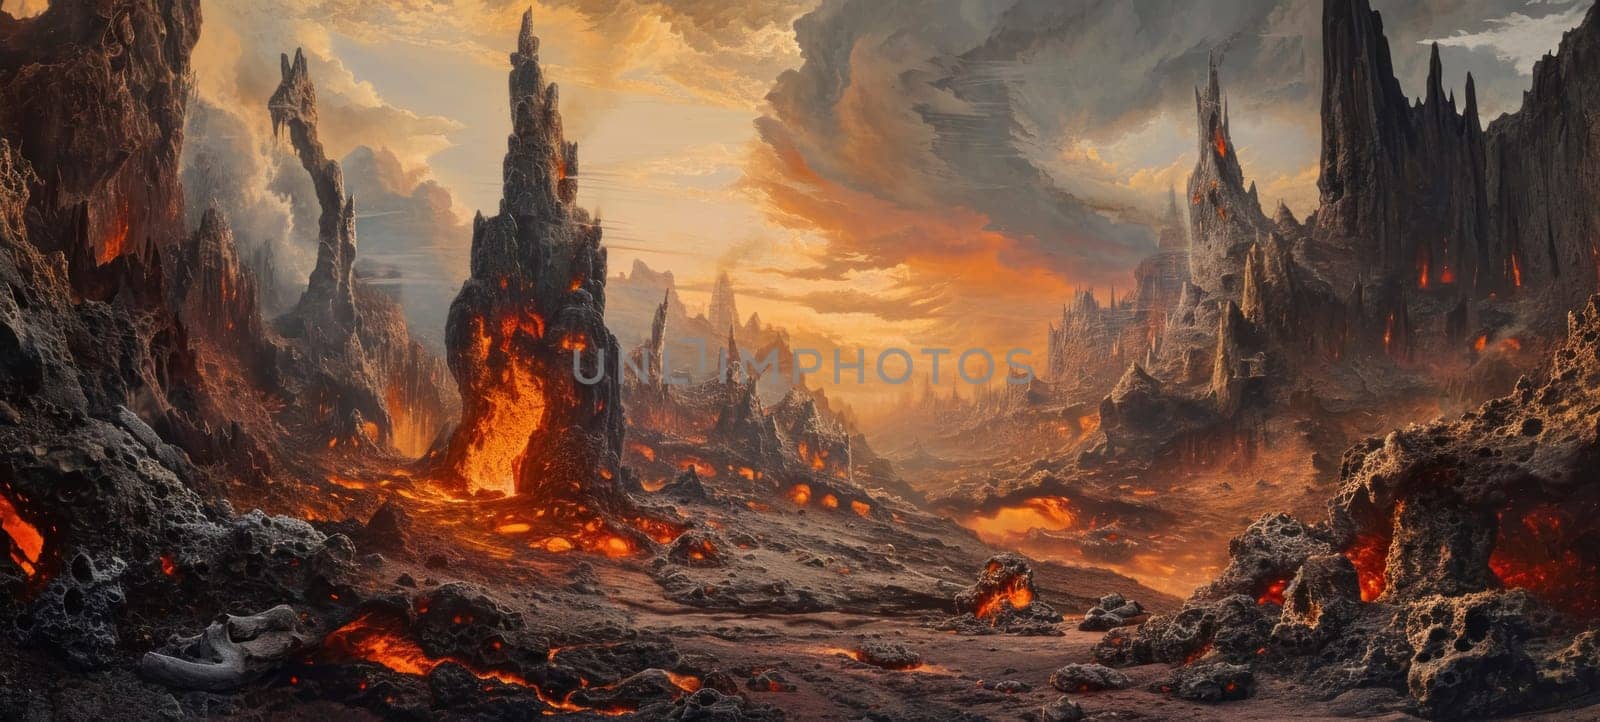 A fantasy landscape painting depicts a volcanic apocalypse with fiery skies and lava fields, evoking a sense of awe and danger.